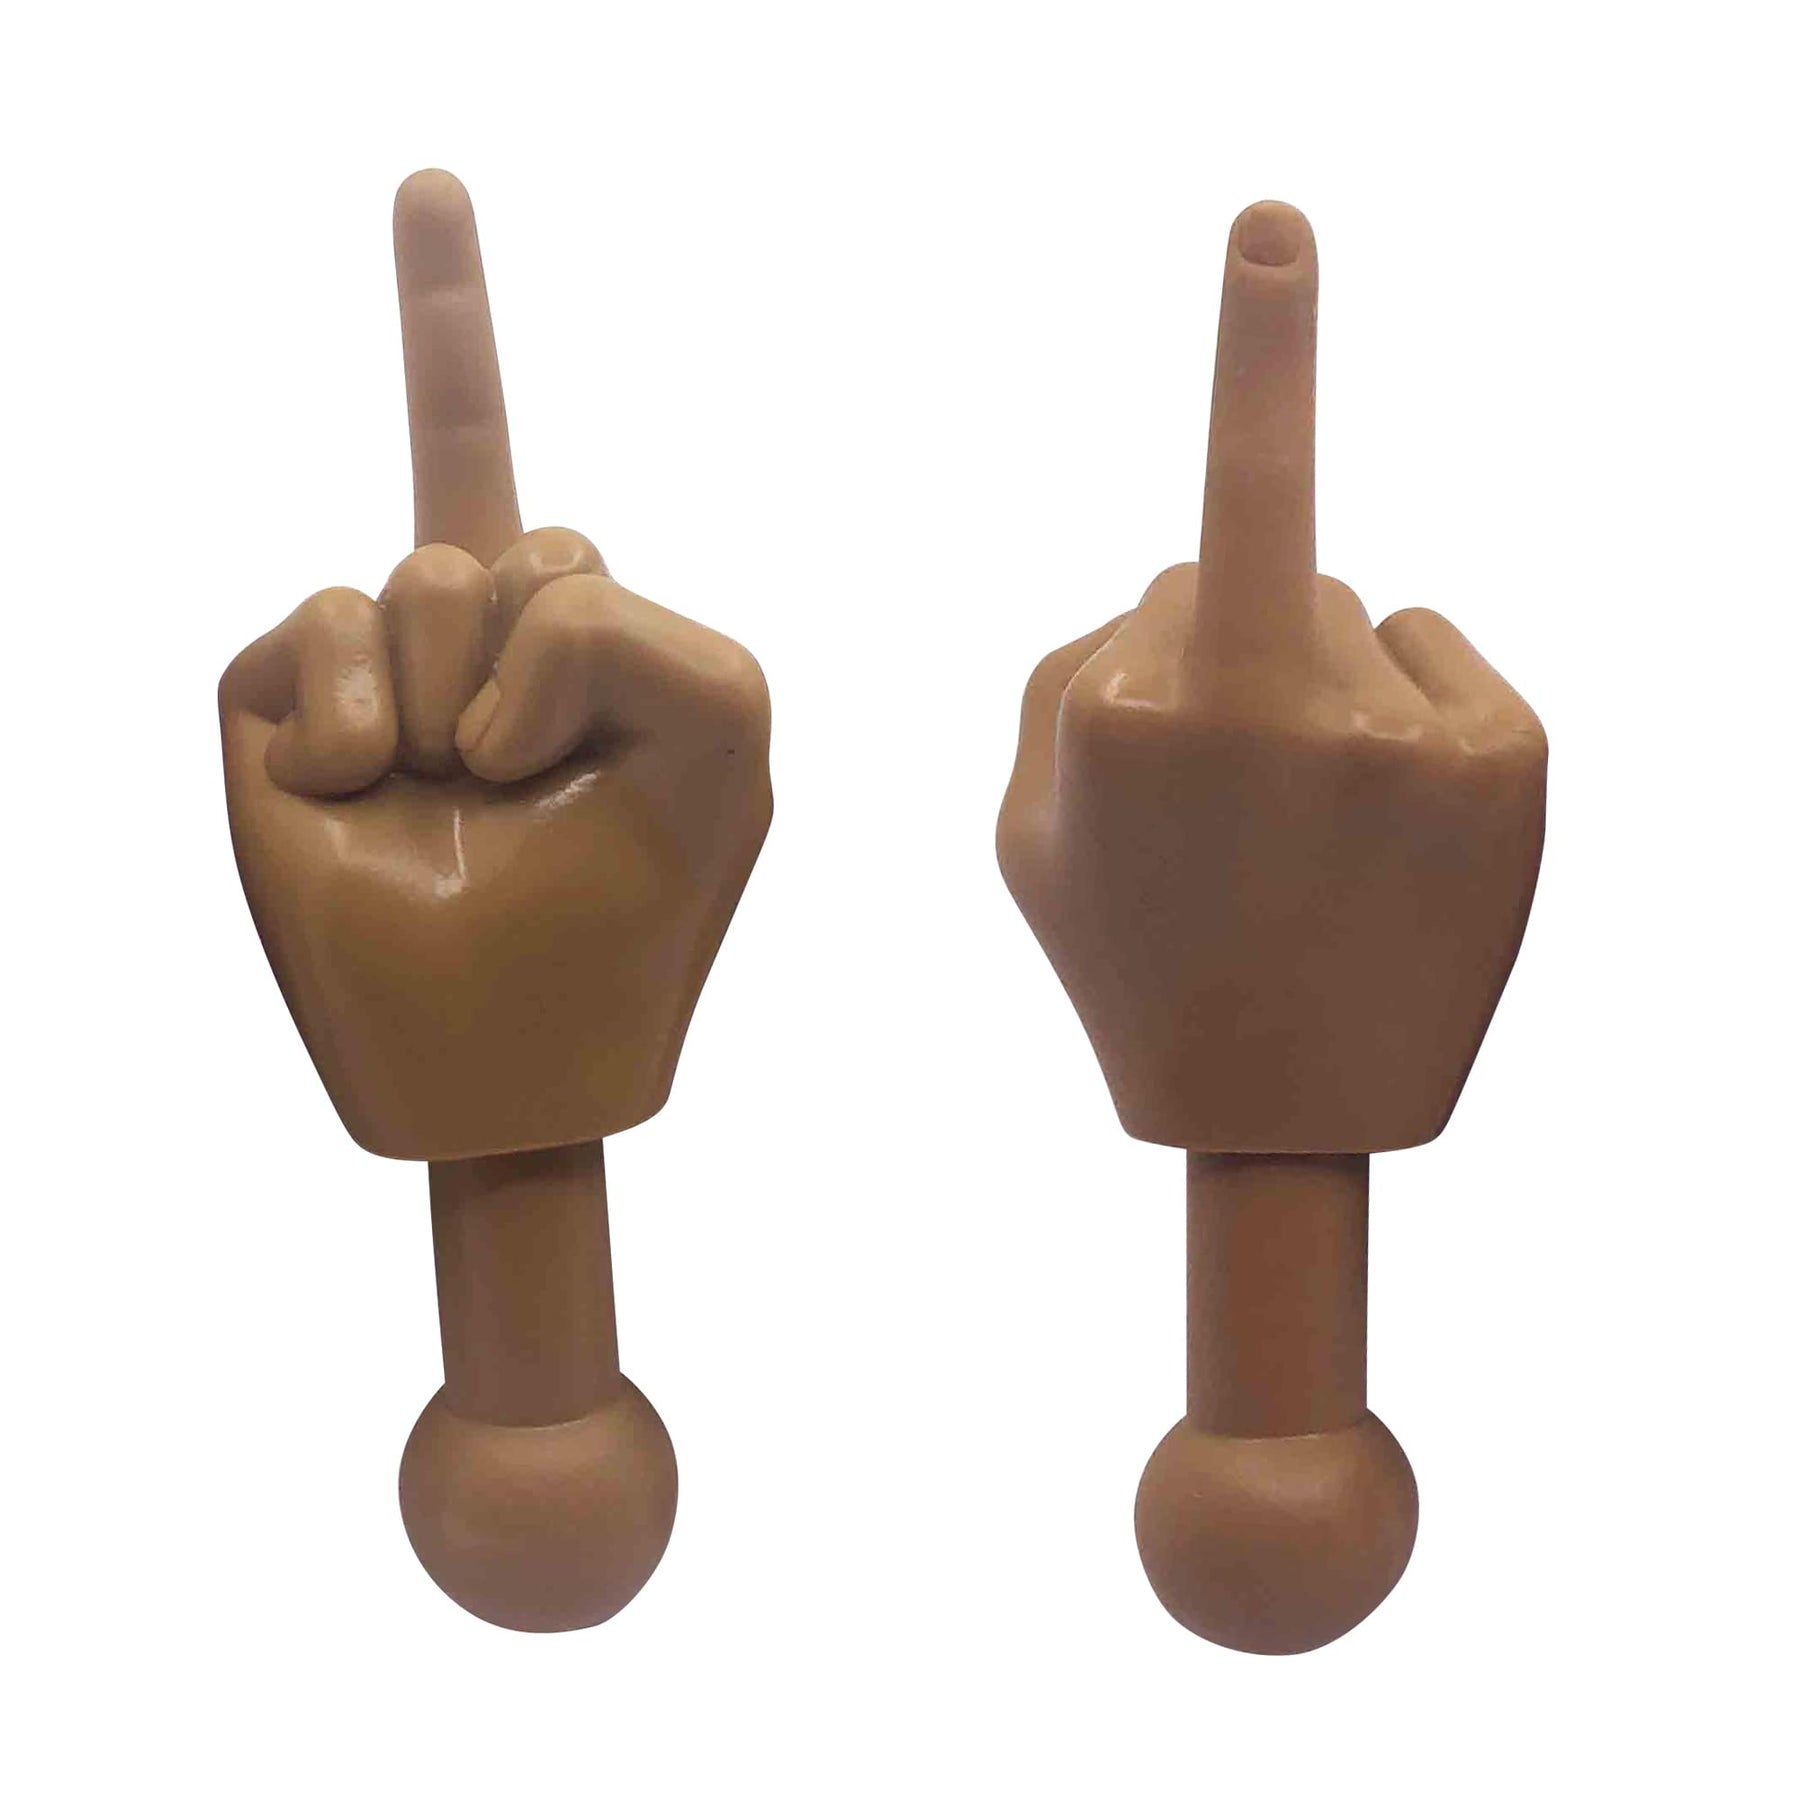 Tiny Hands 4.5-Inch Novelty Toys | Two Middle Finger Hands, Deep Brown